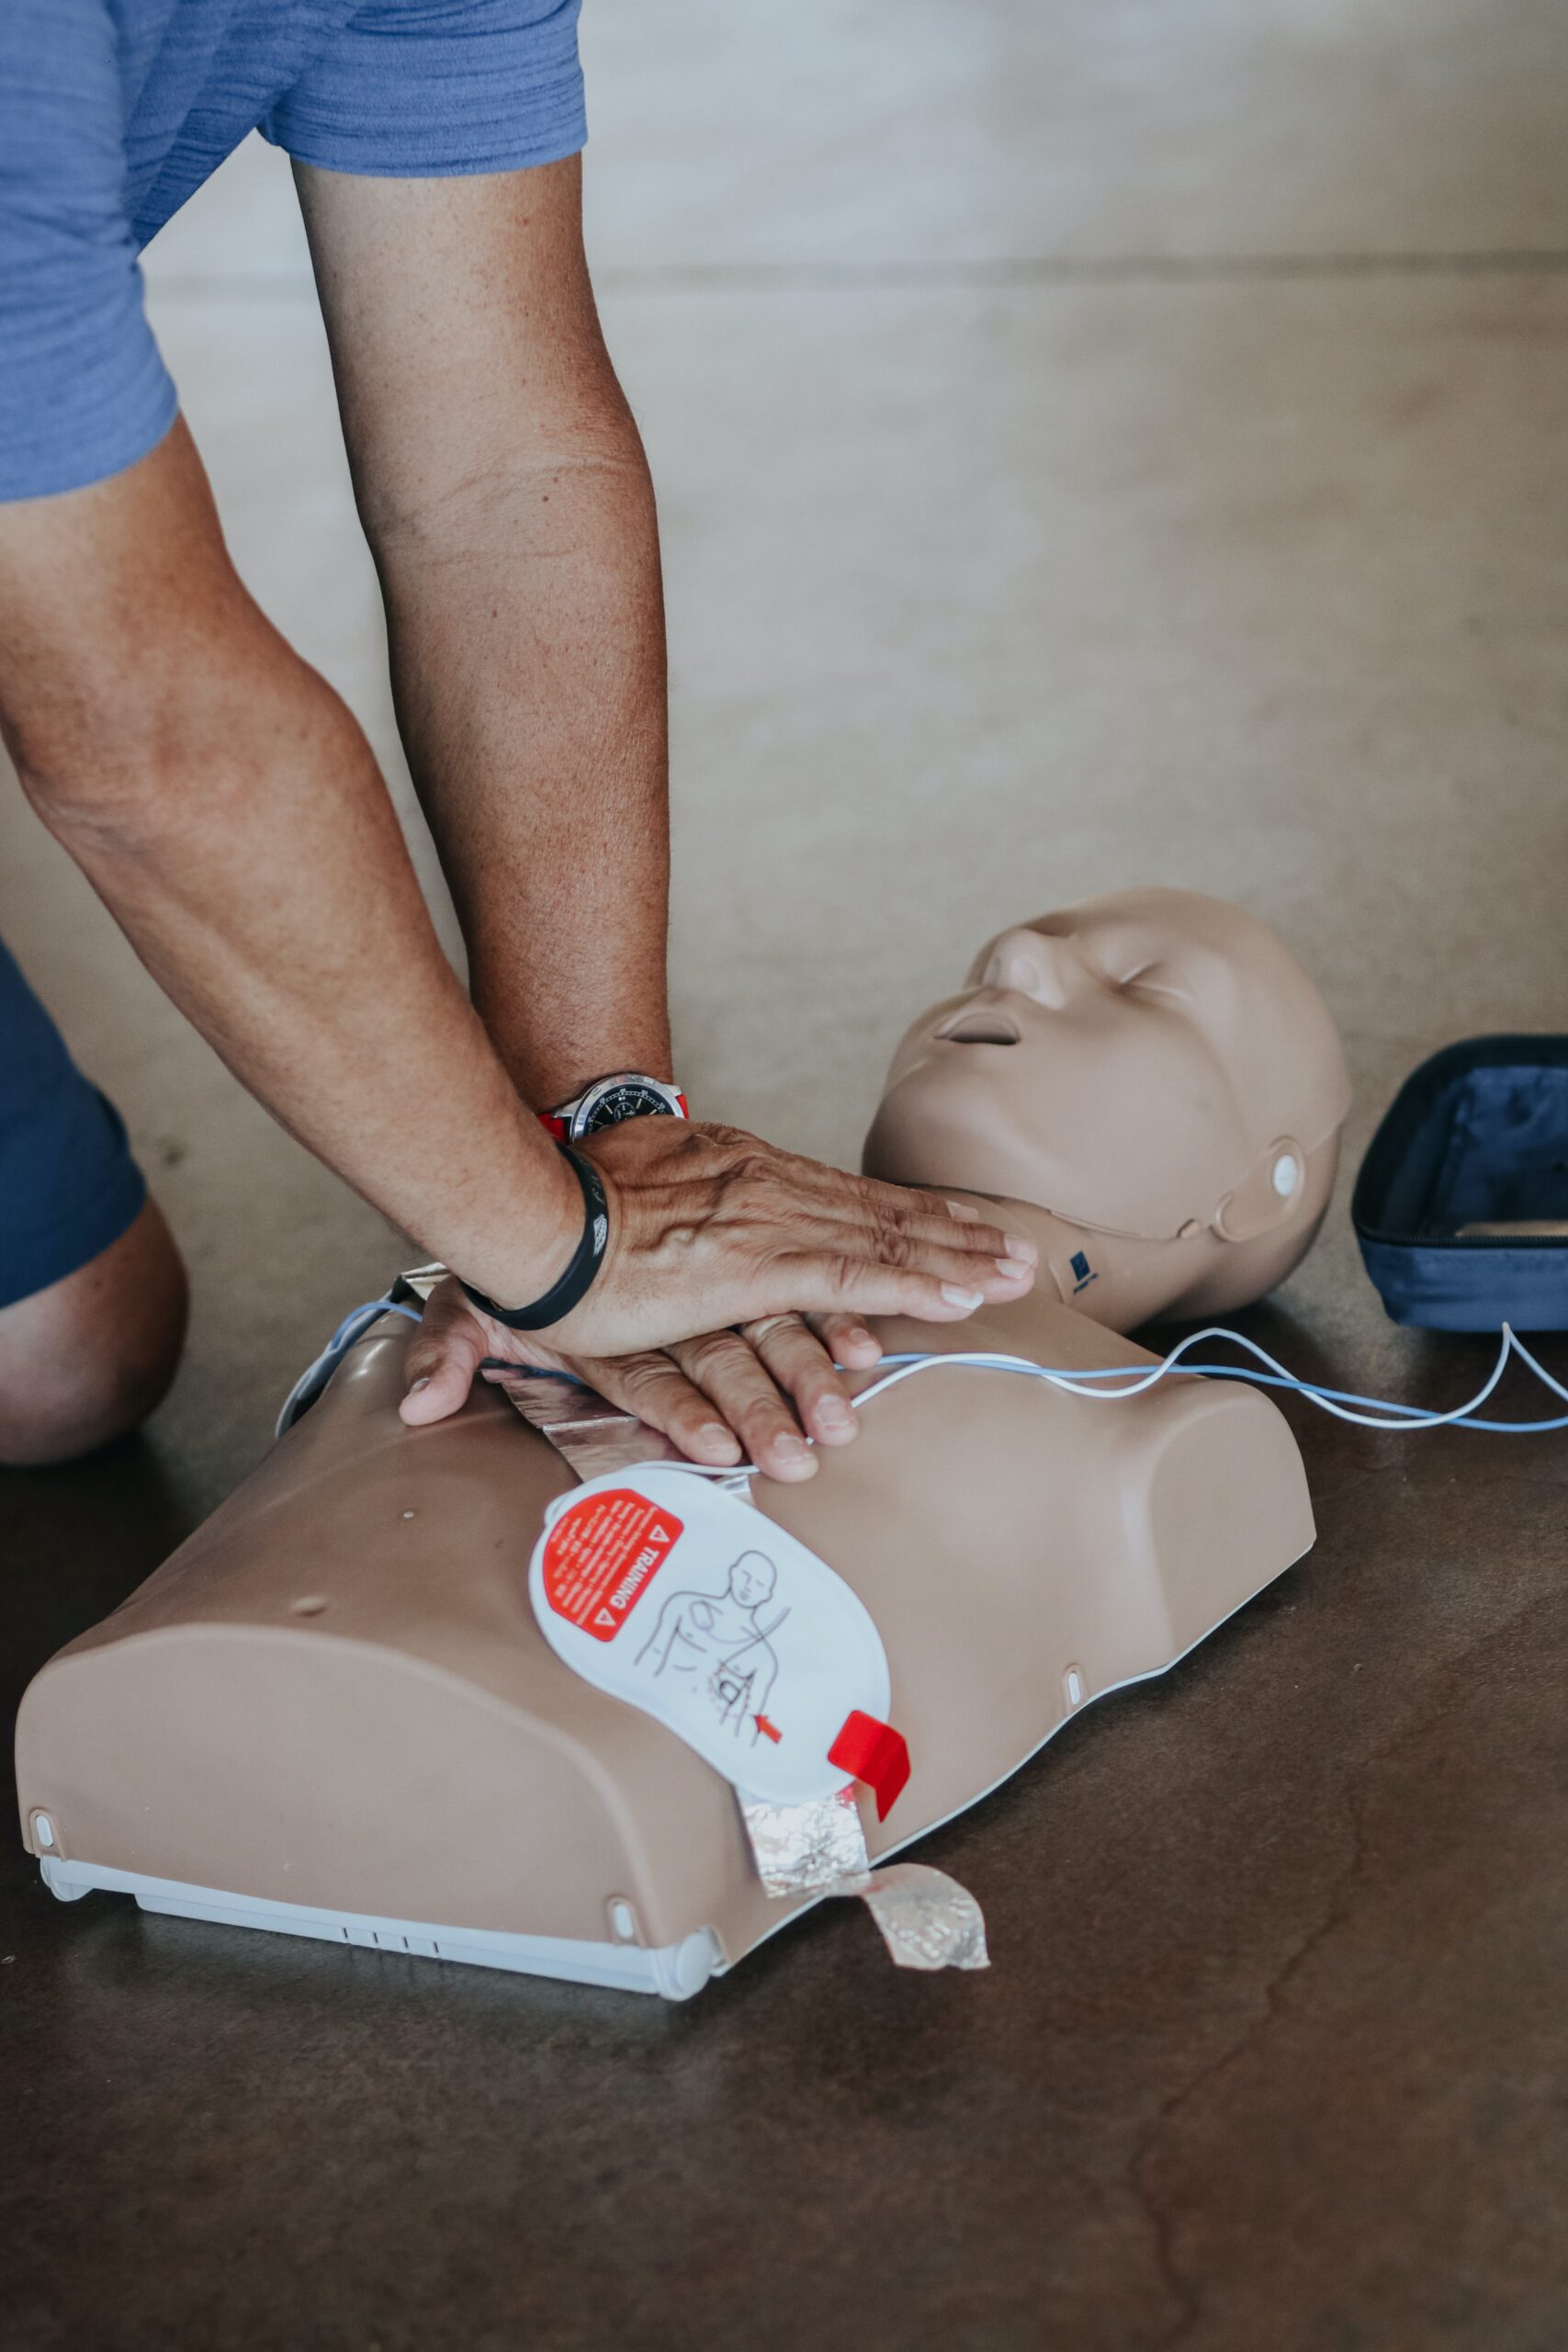 Life-Saving Skills The Critical Need for CPR Training in Every Community